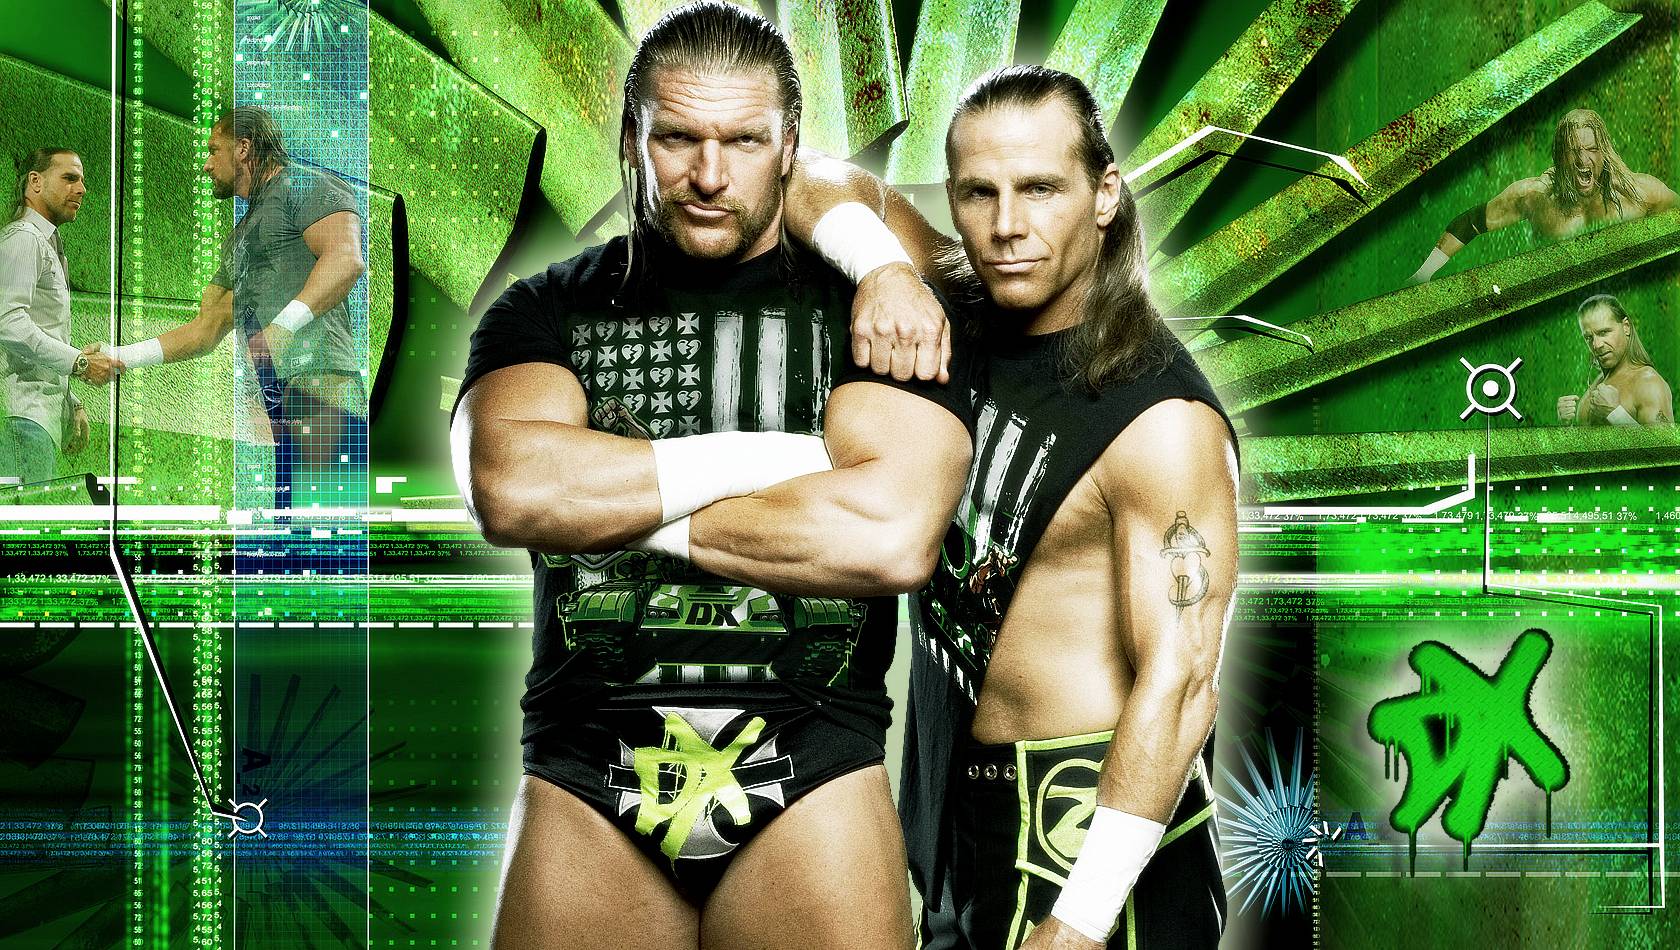 dx wwe wallpapers download